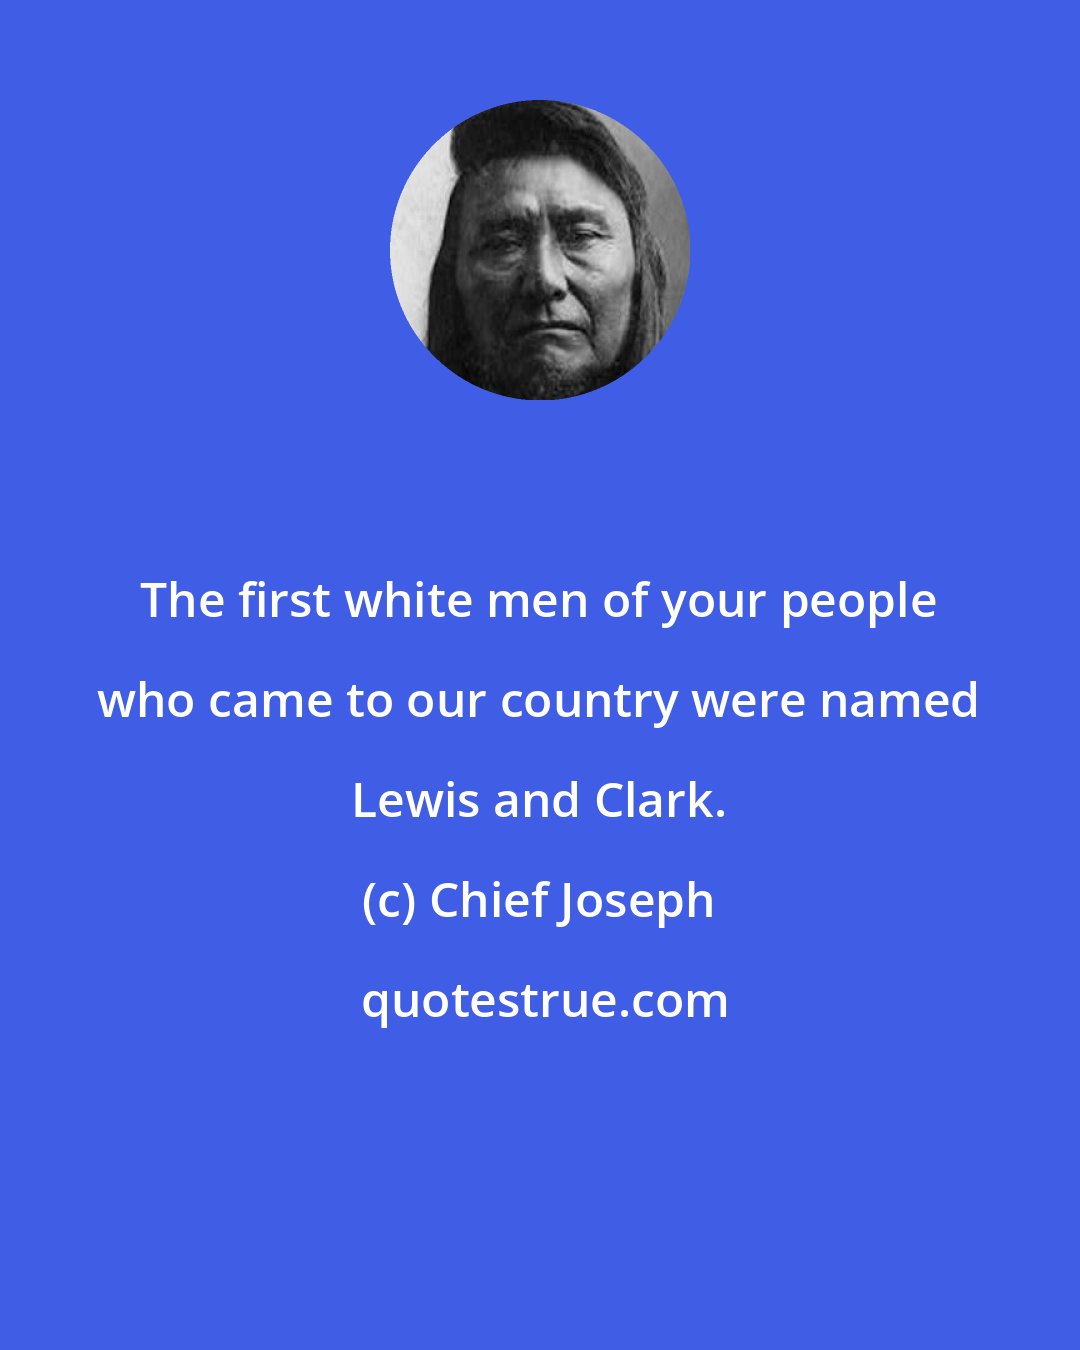 Chief Joseph: The first white men of your people who came to our country were named Lewis and Clark.